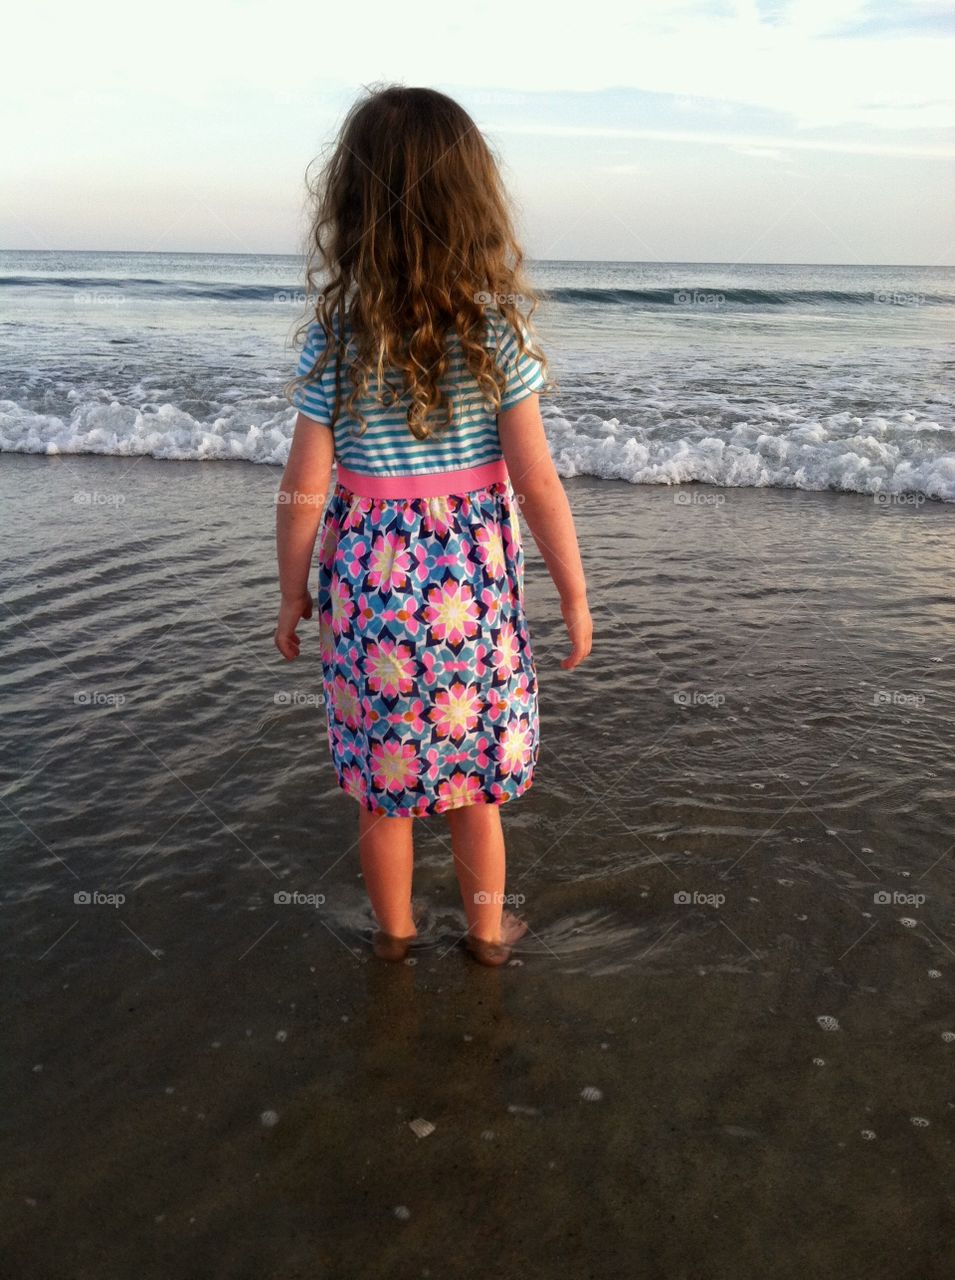 Innocent little girl gazed at the enormity of the vast ocean at Emerald Isle North Carolina 